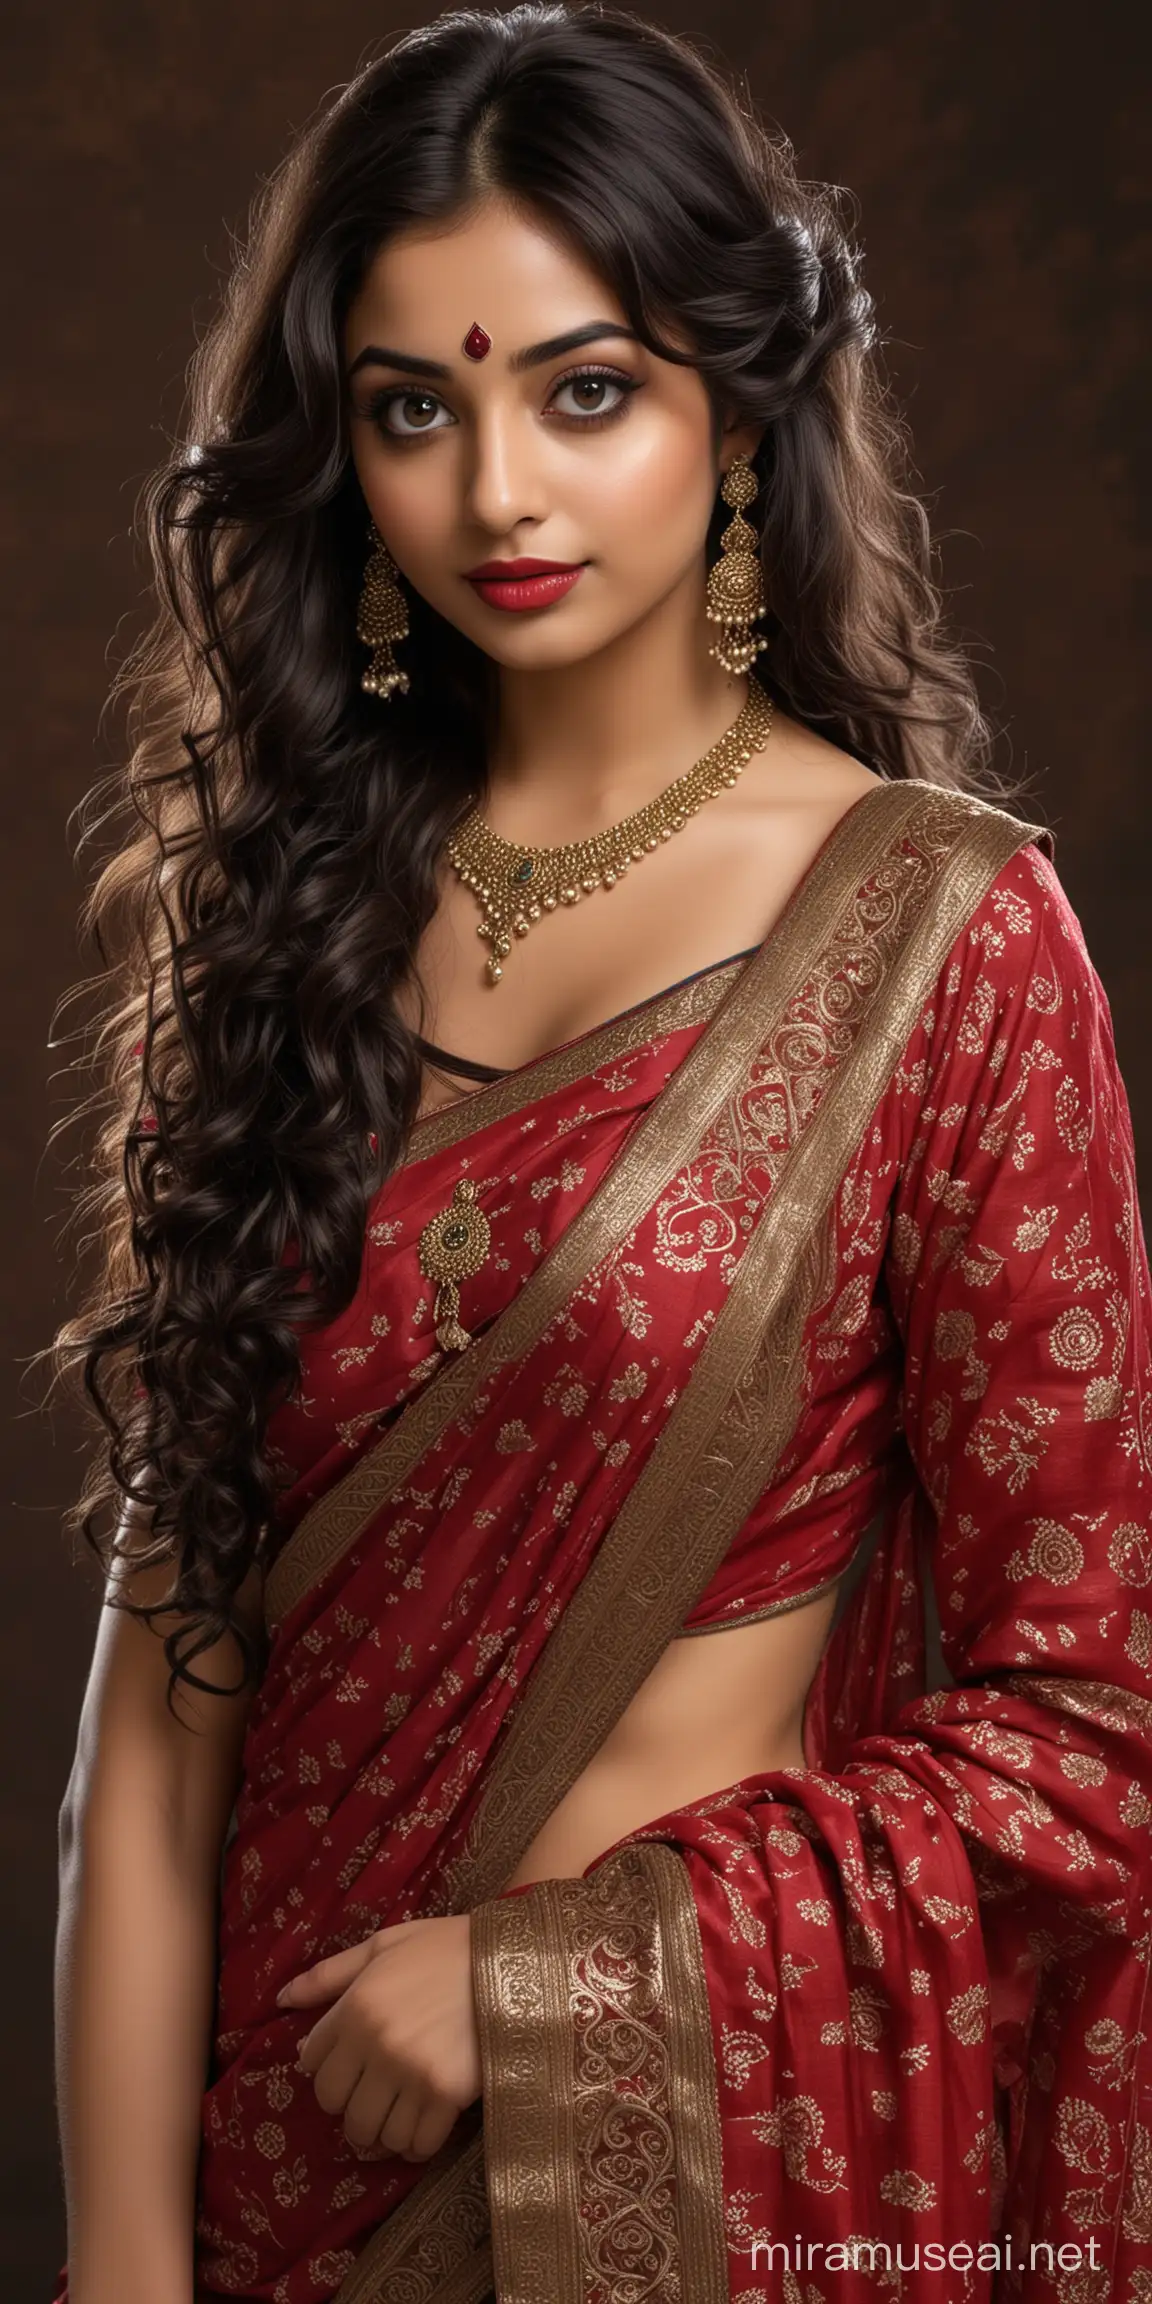 Beautiful European to Indian Transformation Symmetric Beauty in Traditional Saree